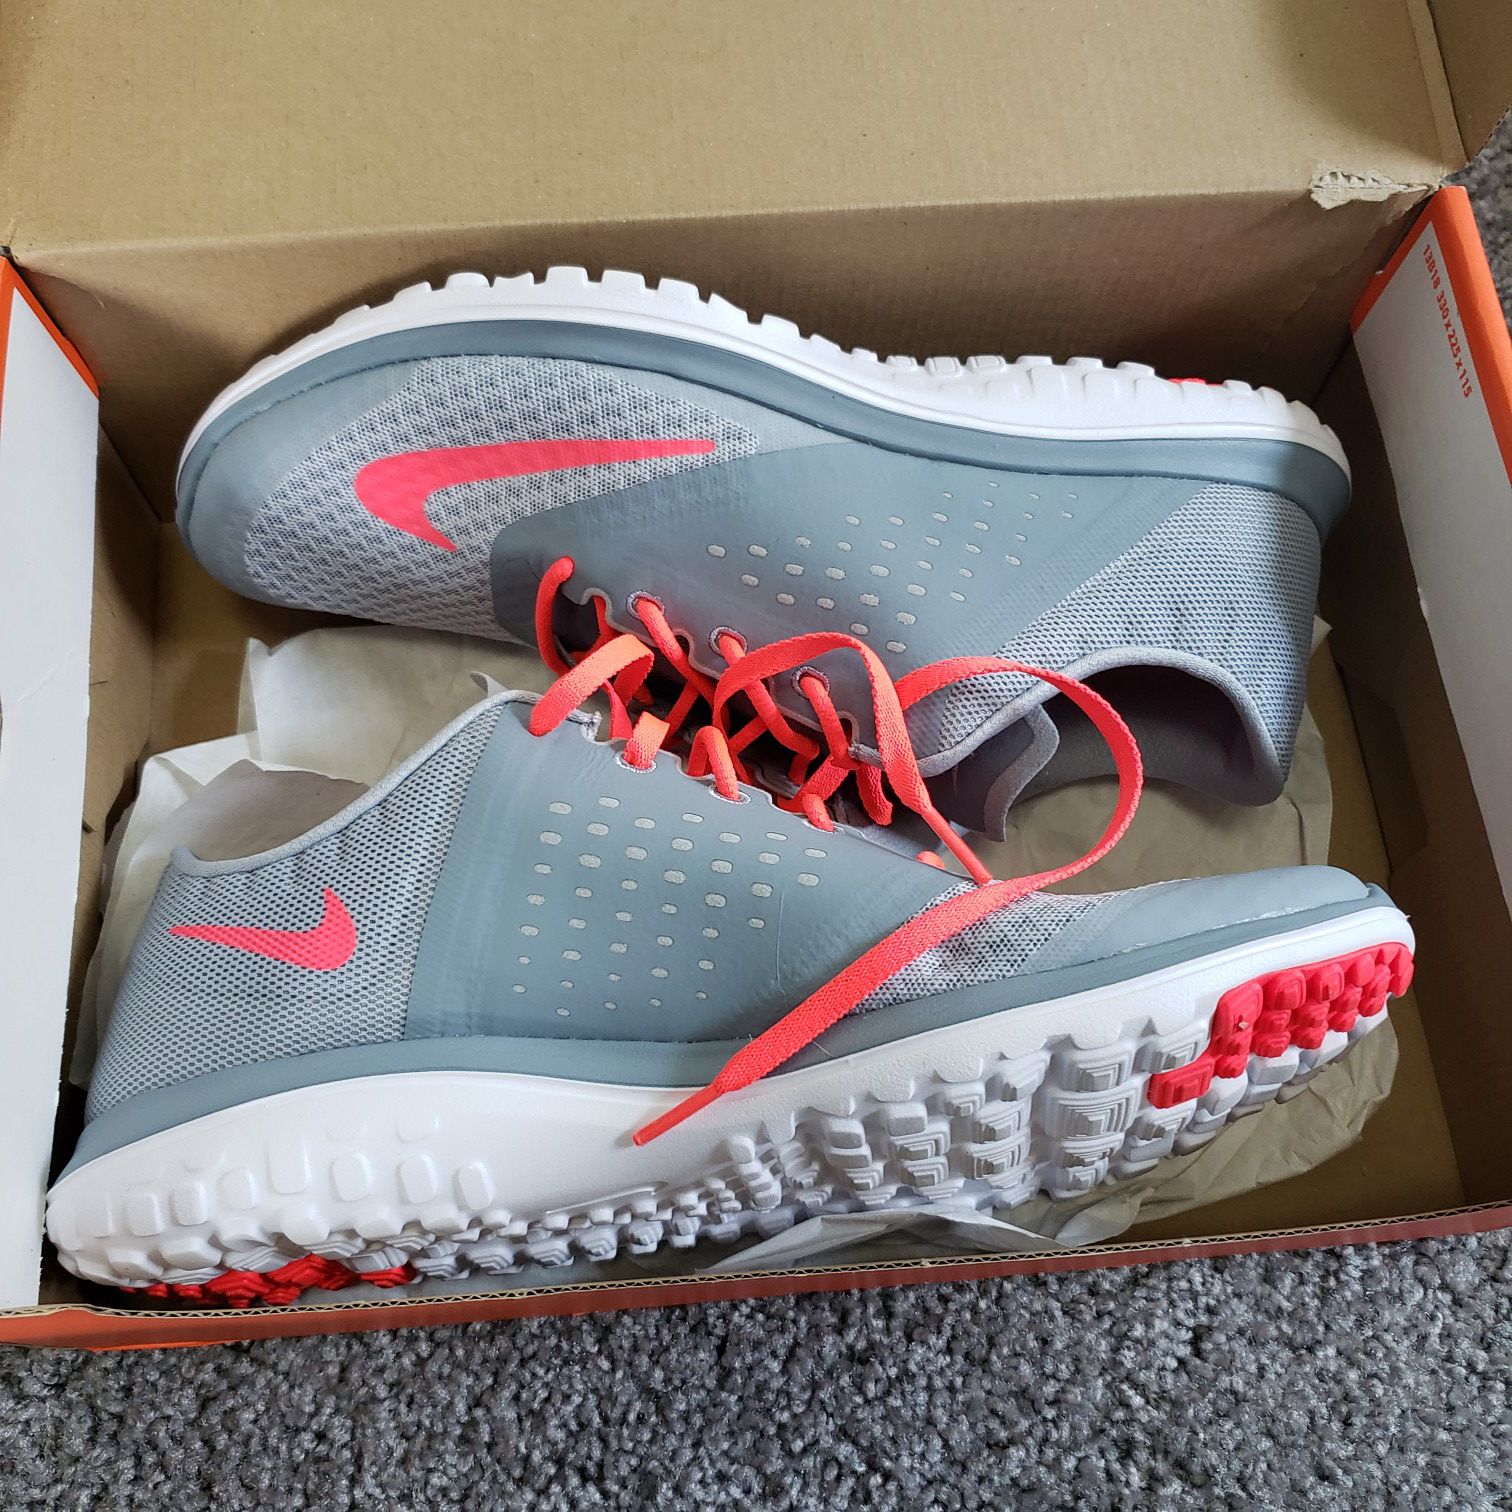 NEW Nike Tennis Shoes - Size 11